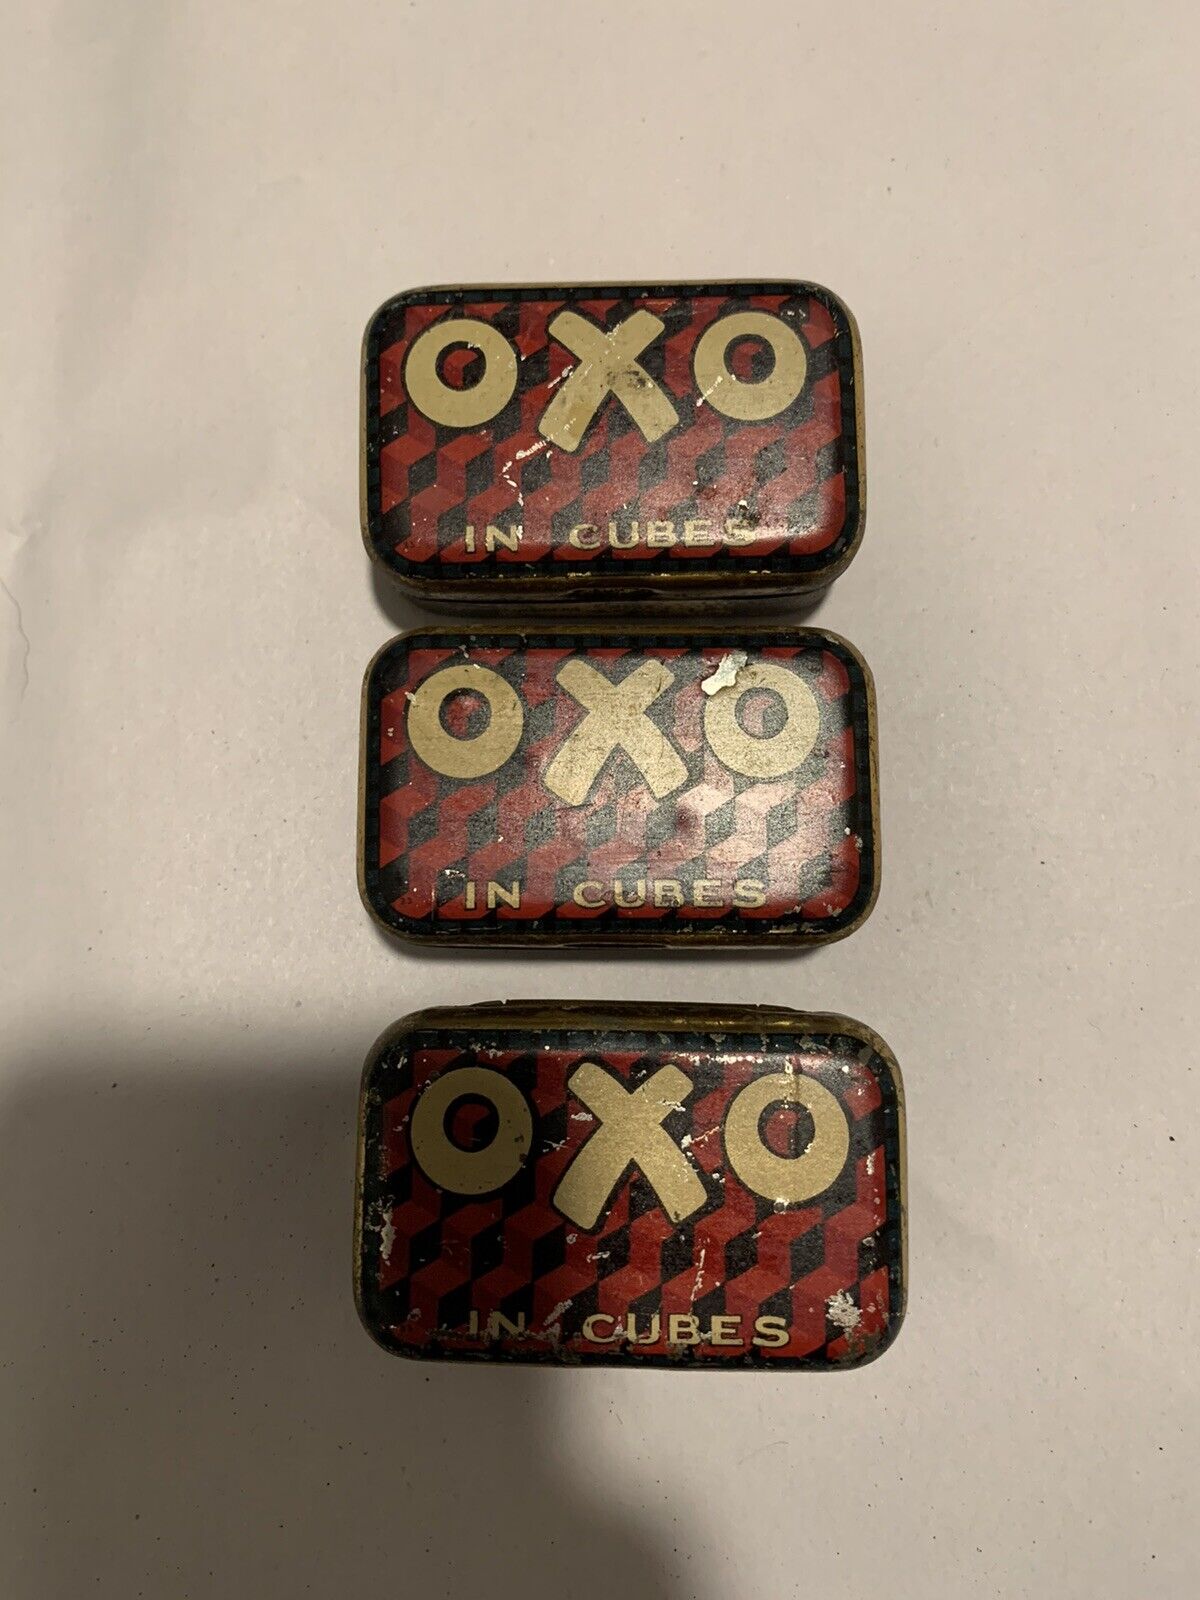 XOX in cubes antique tins rare 1910-1920 Made In London